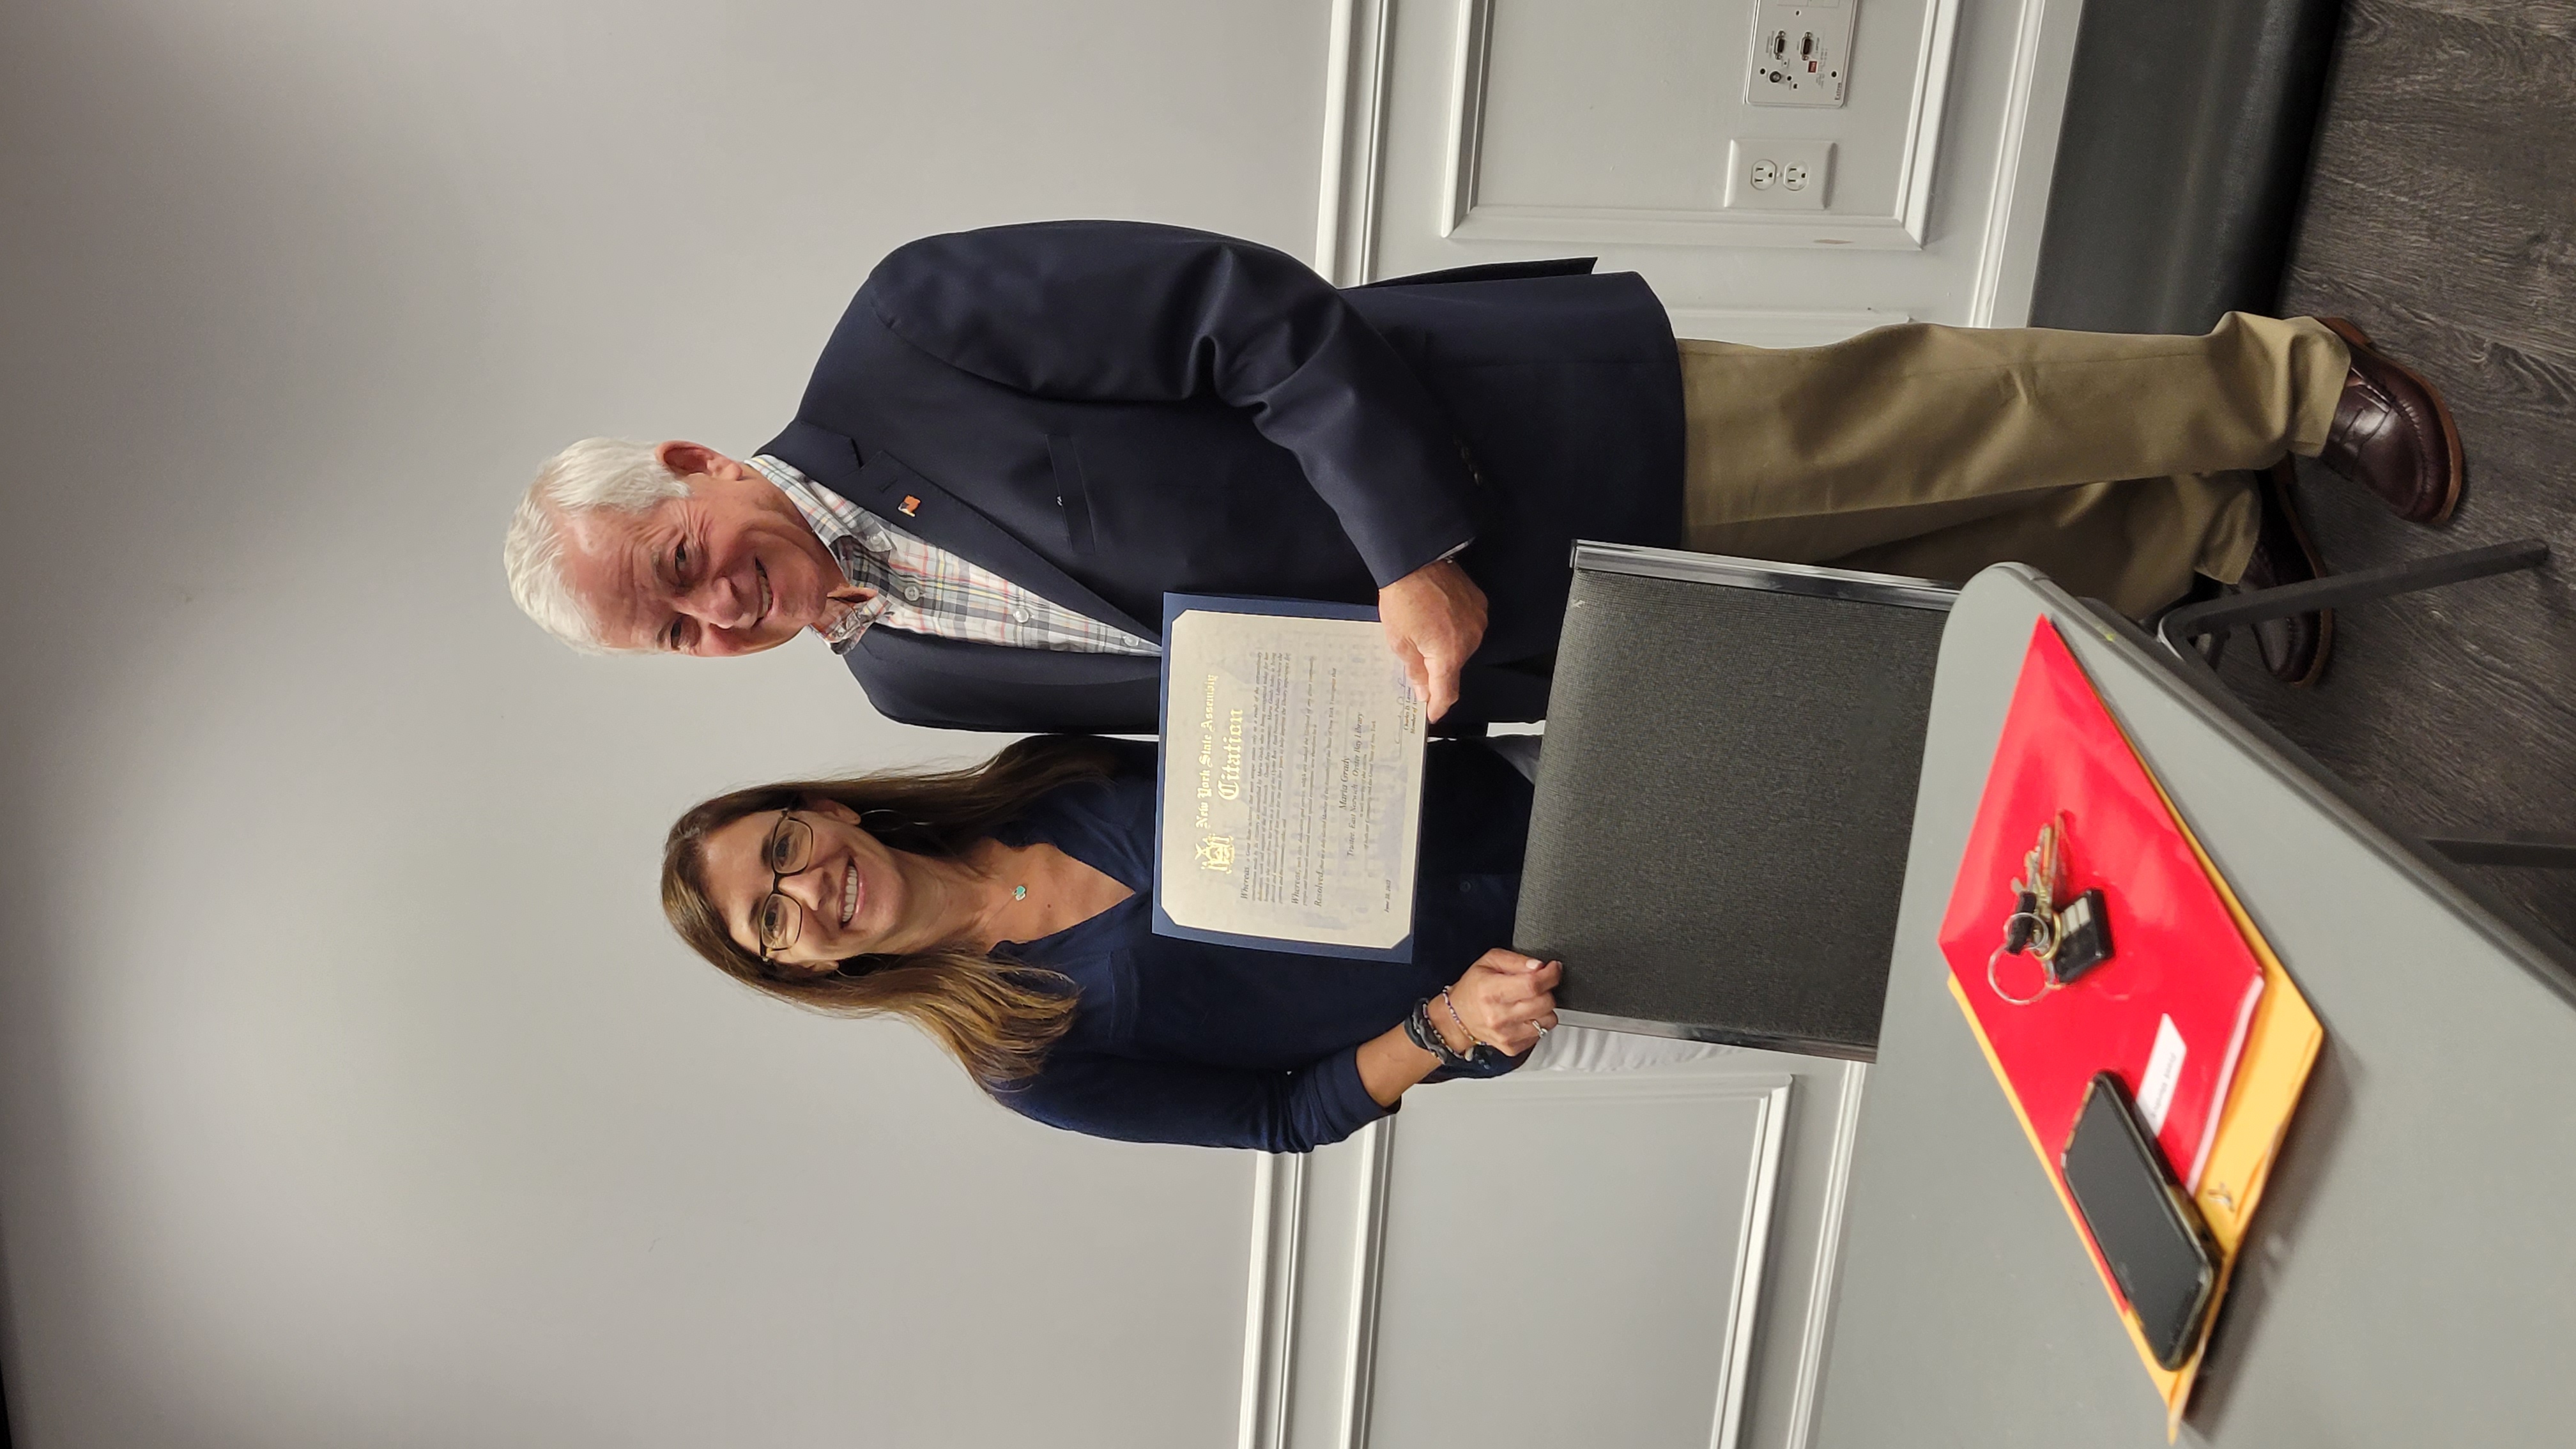 Assemblymember Lavine presents a citation to Maria Grady as she retires from her term as a Trustee of the Oyster Bay-East Norwich Public Library. For the past 5 years Maria has devoted her time to hel